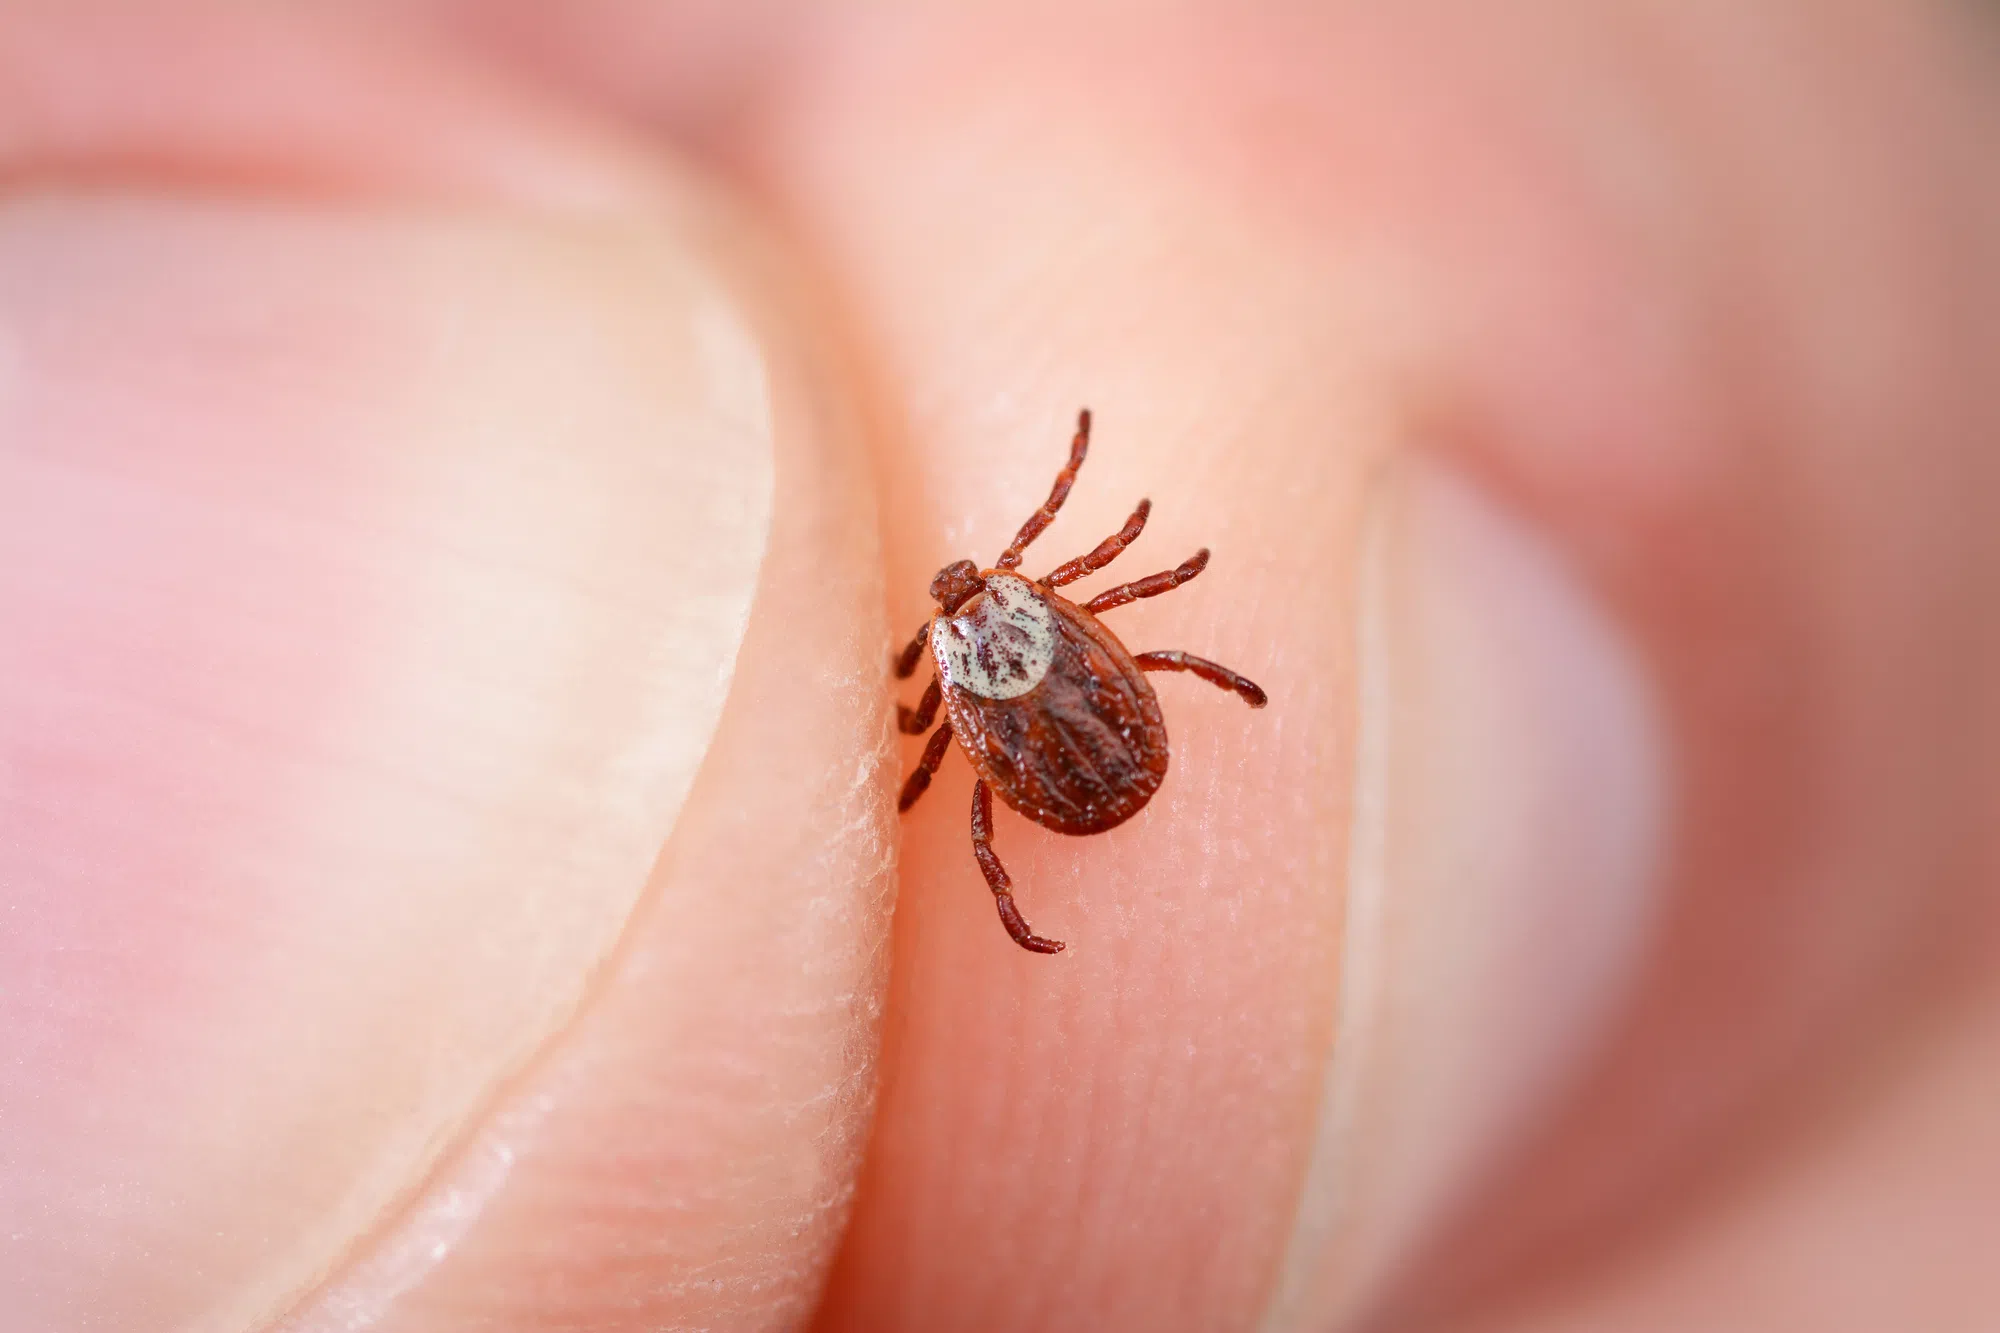 Worried About A Tick You Found On Yourself Or A Pet? Check Out This App!